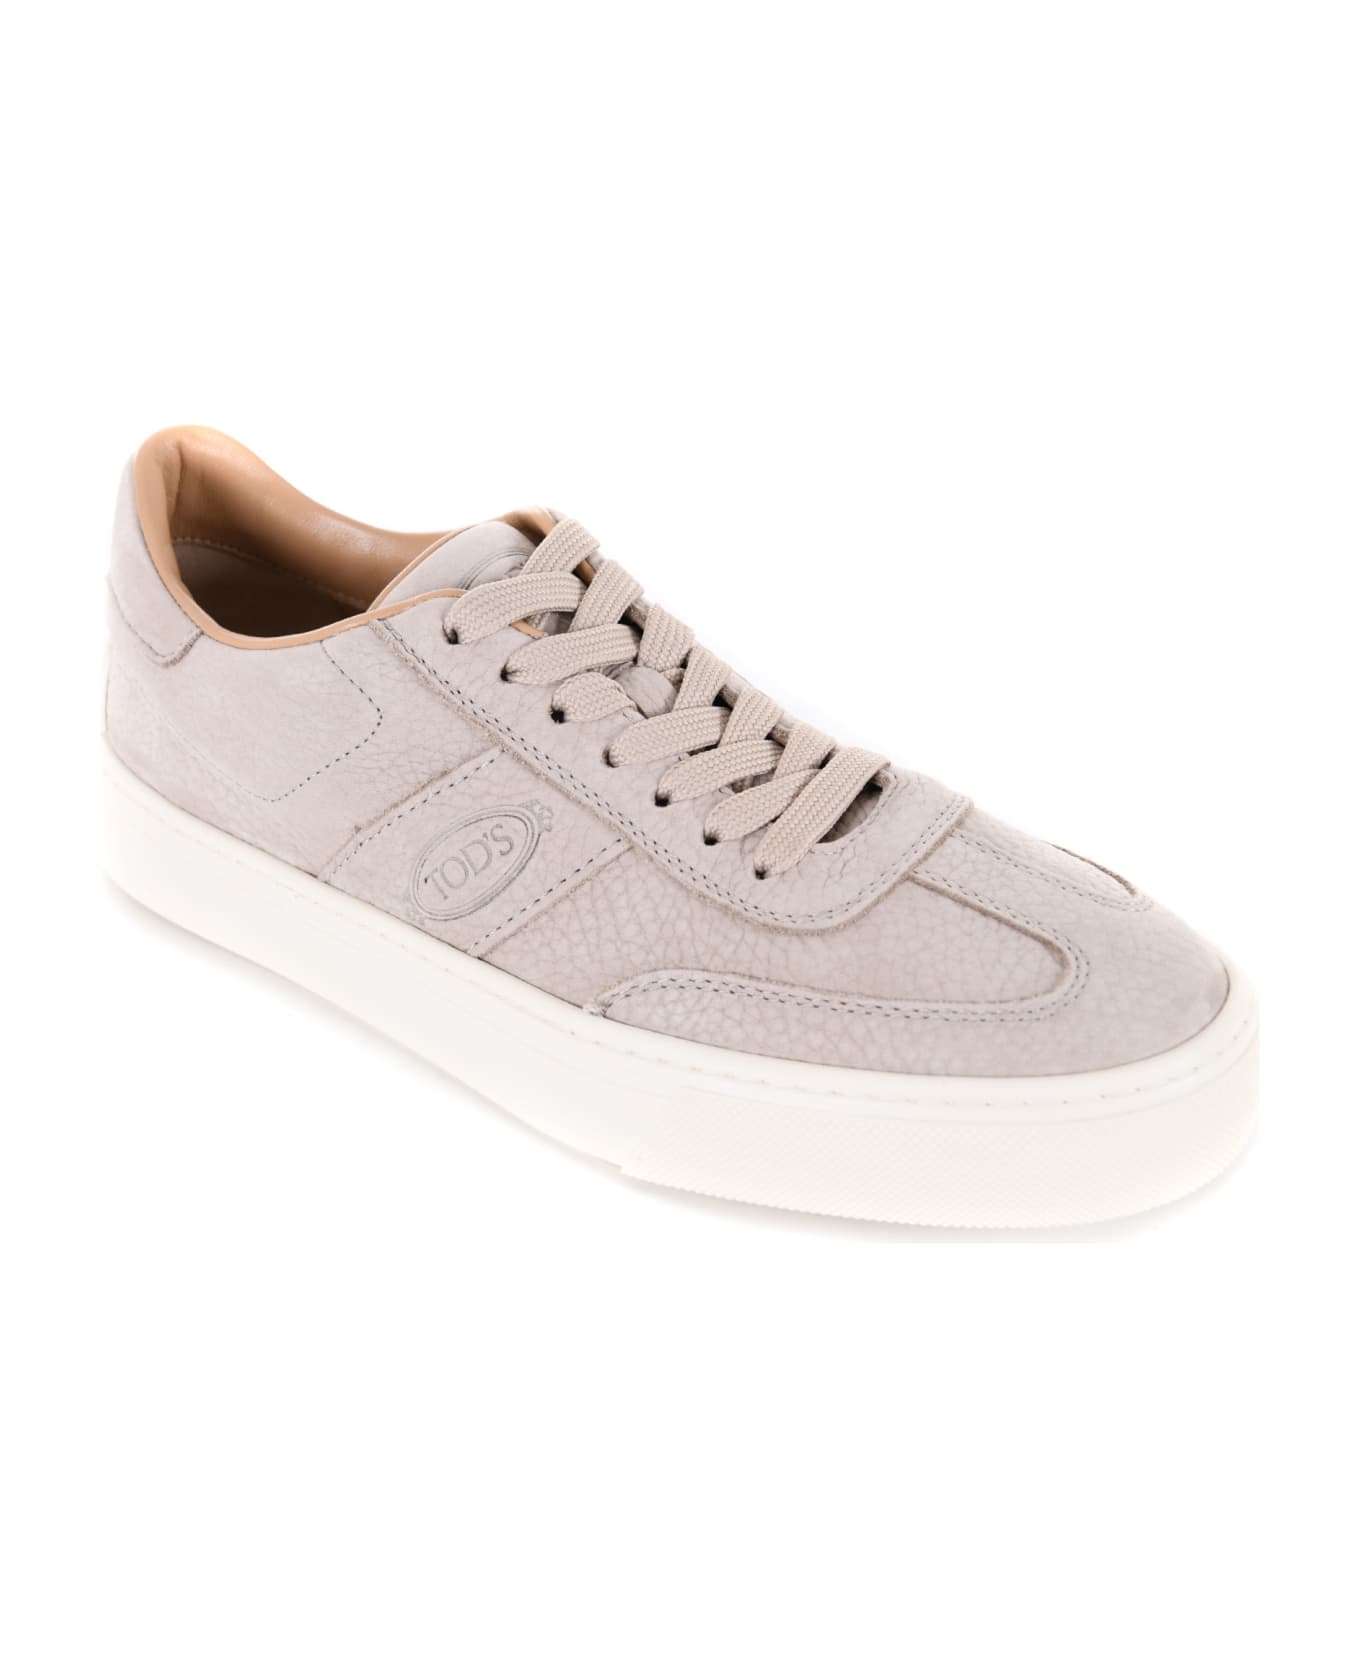 Tod's Round Toe Lace-up Sneakers - Tortora